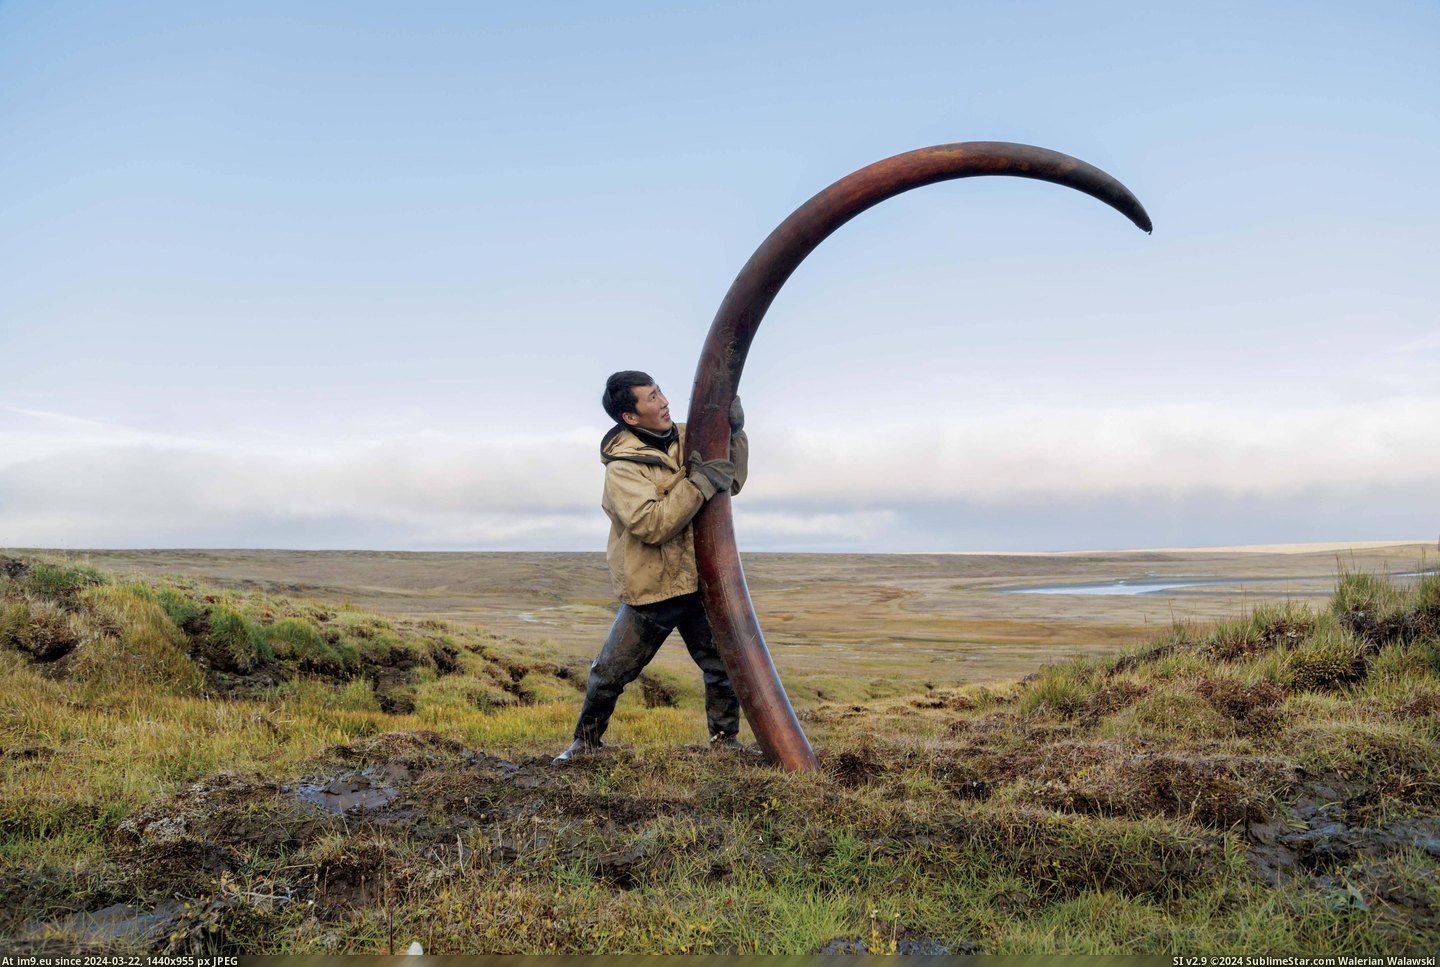 #Tusk #Siberian #Mammoth [Pics] A woolly mammoth's tusk is unearthed from a Siberian riverbed Pic. (Image of album My r/PICS favs))